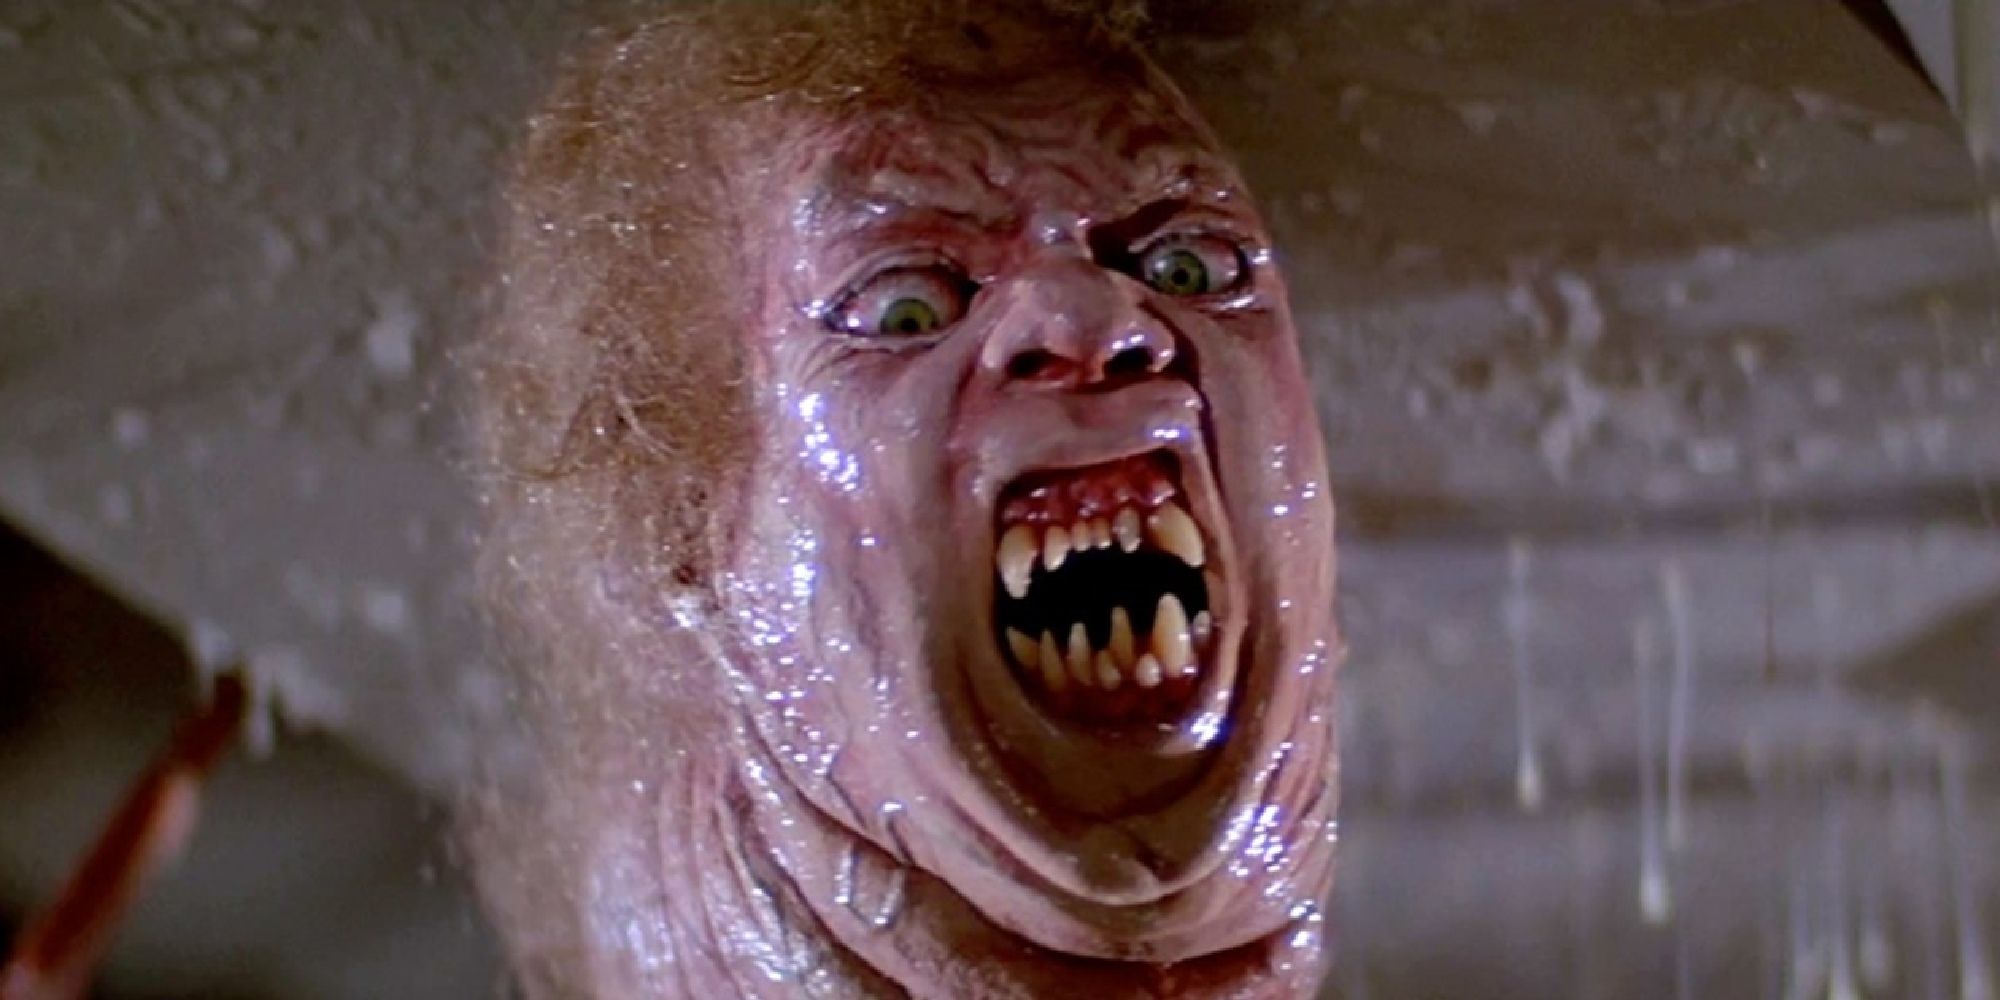 The creature in The Thing, appearing as a deformed human head